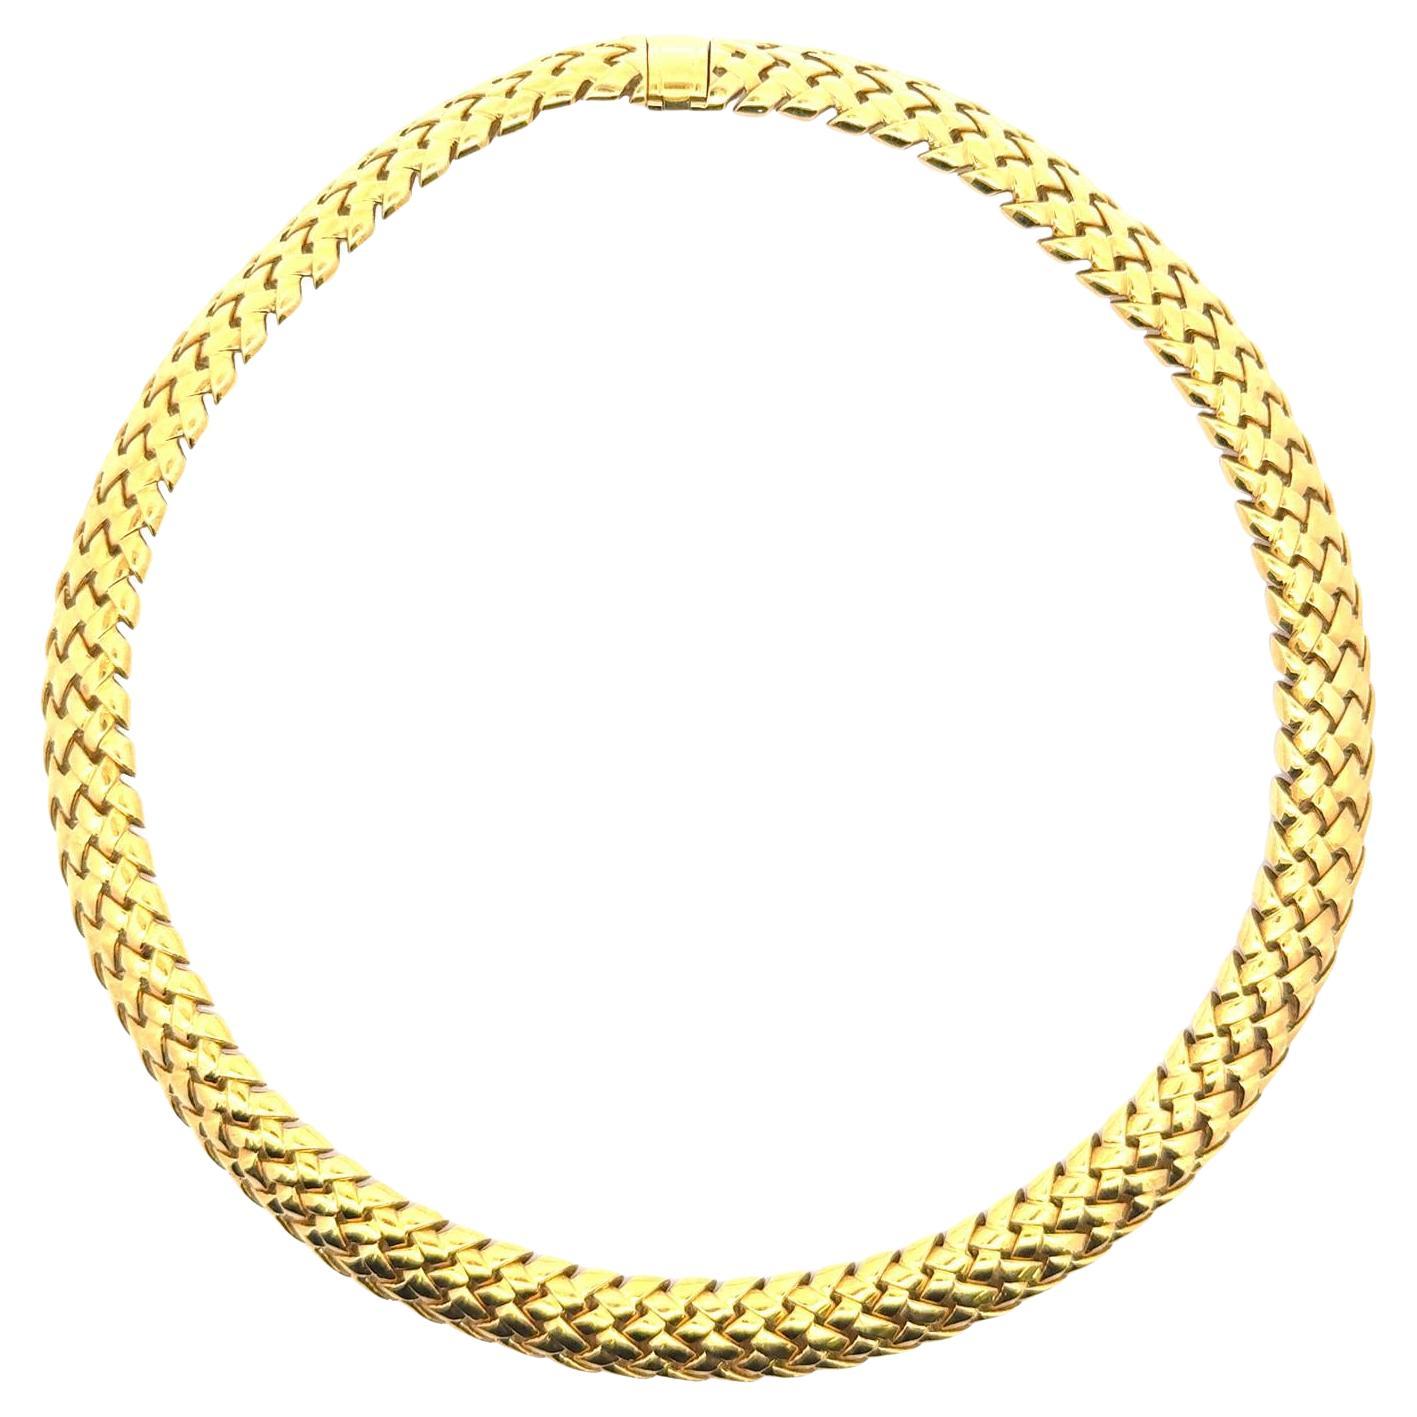 1995 Tiffany & Co. 18 Karat Yellow Gold Vannerie Basket Weave Link Necklace For Sale